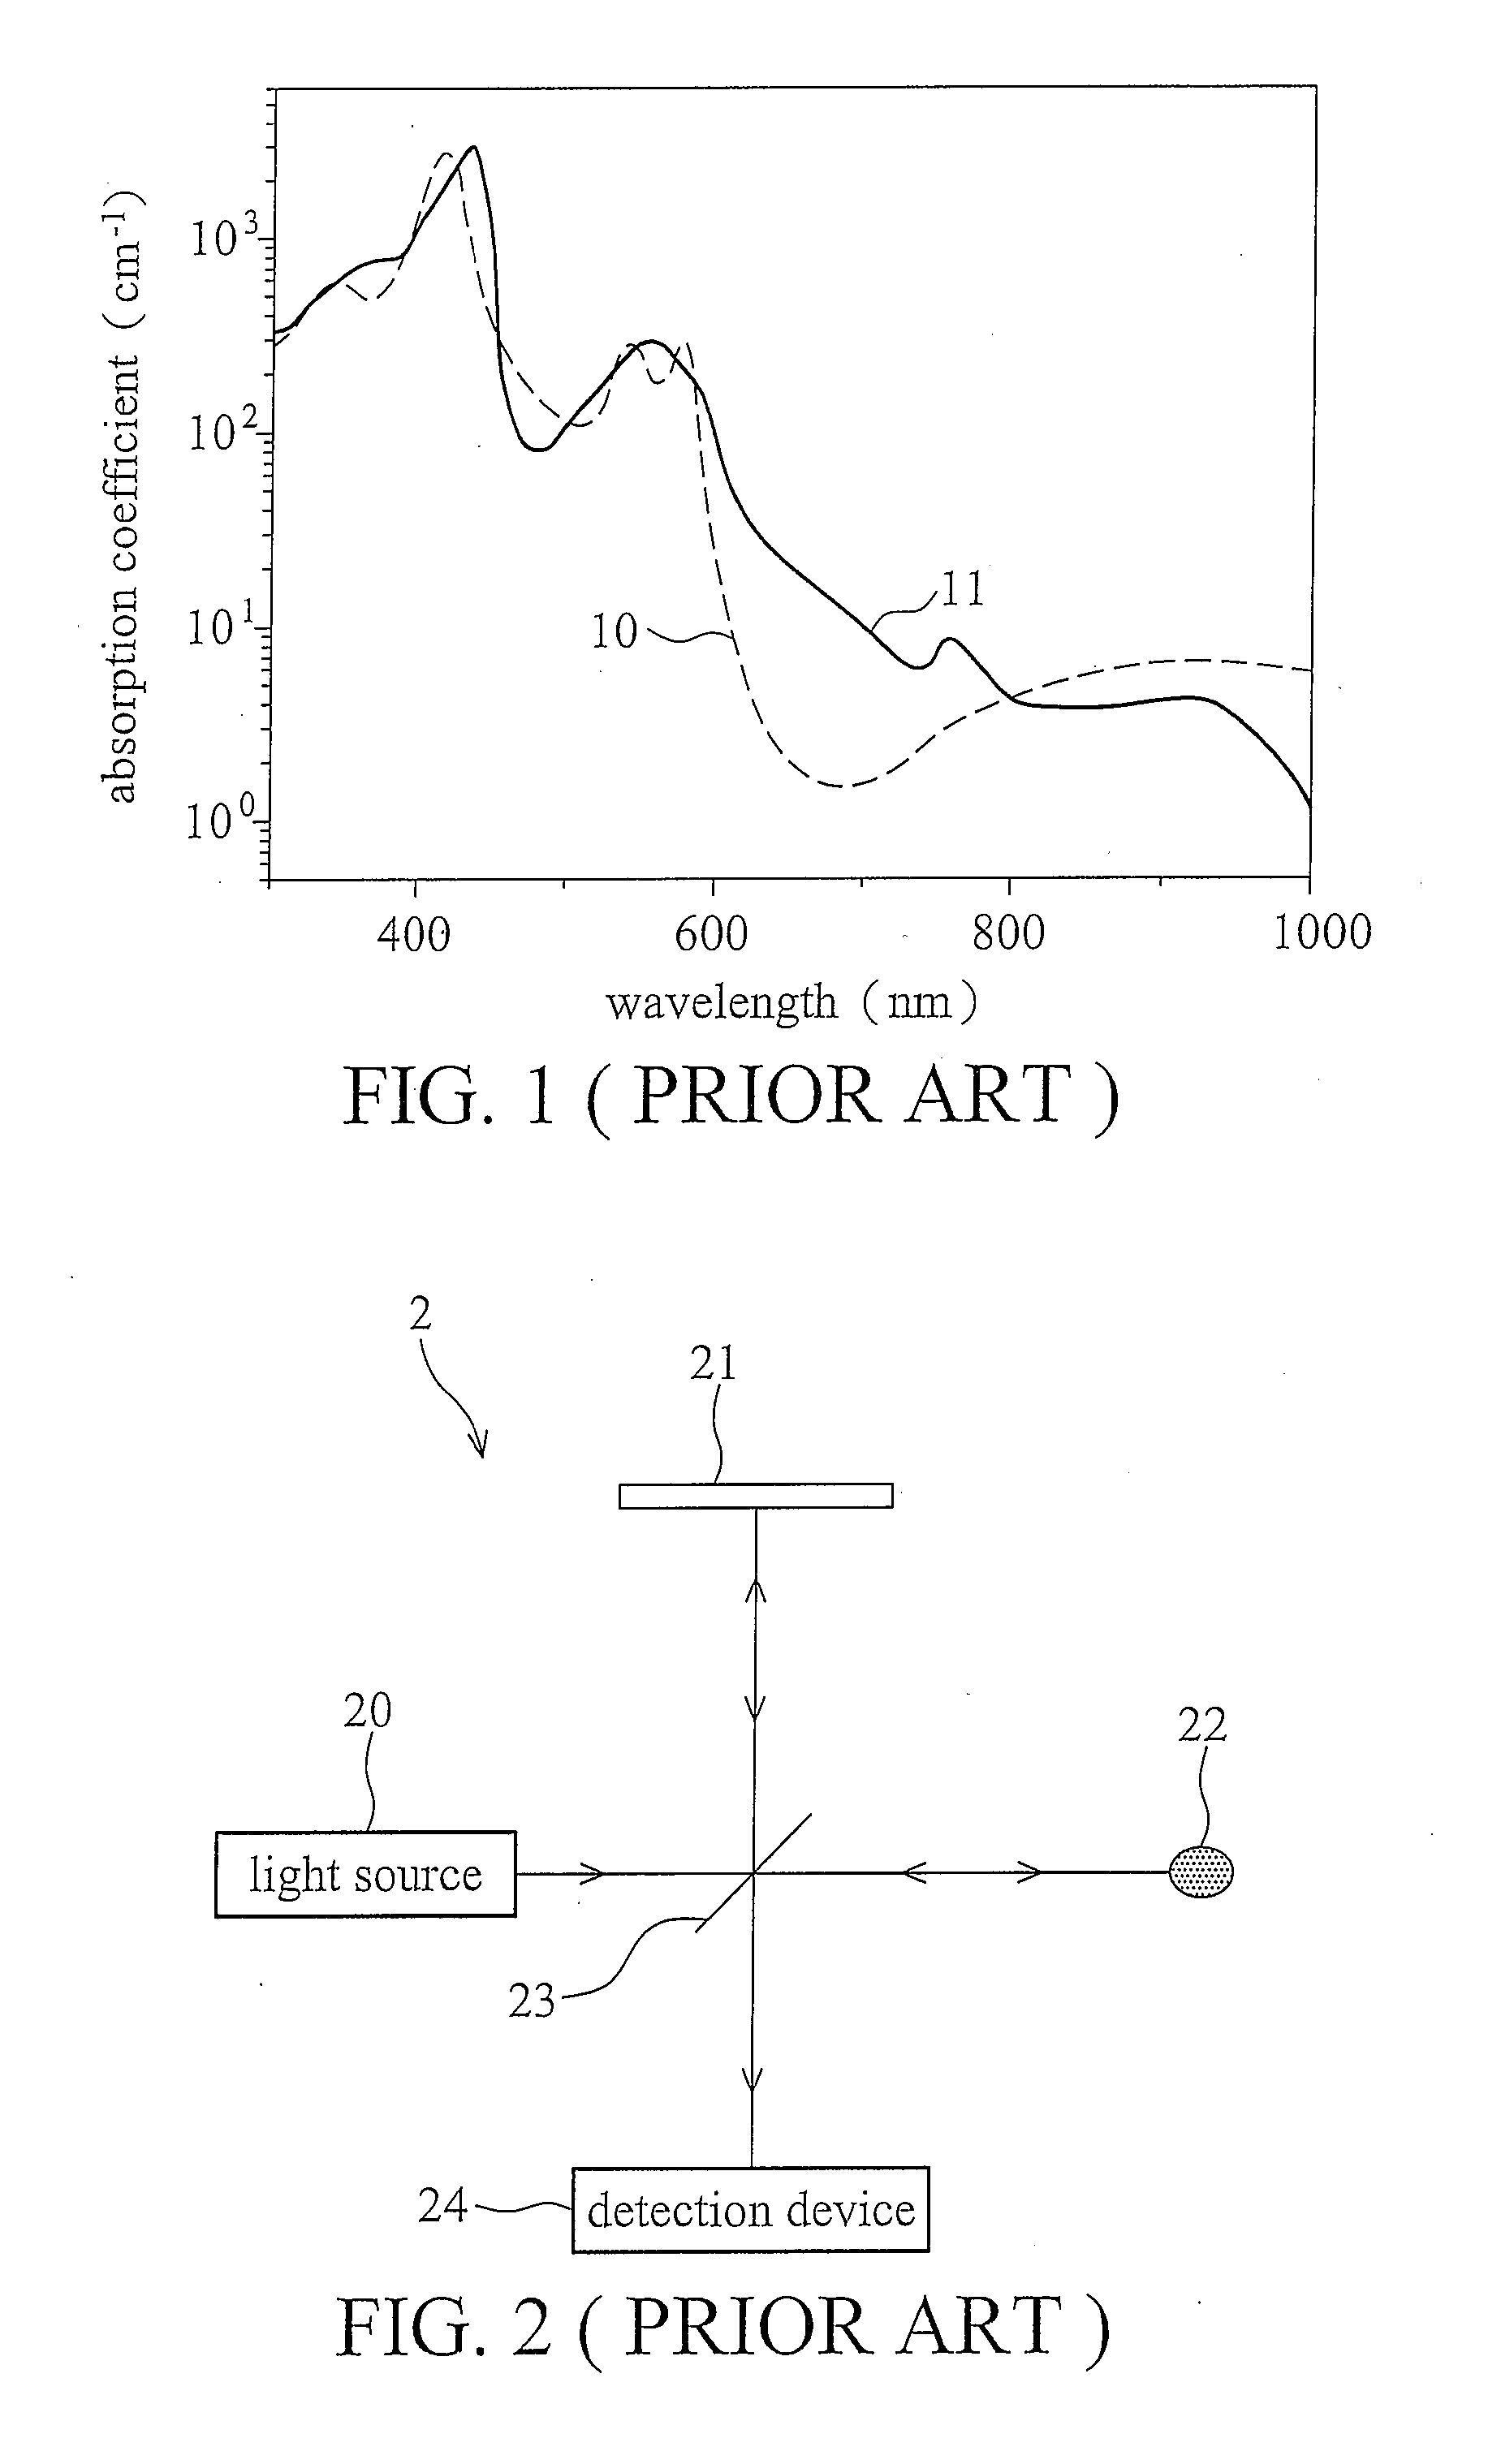 Measurement systems and methods for oxygenated hemoglobin saturation level